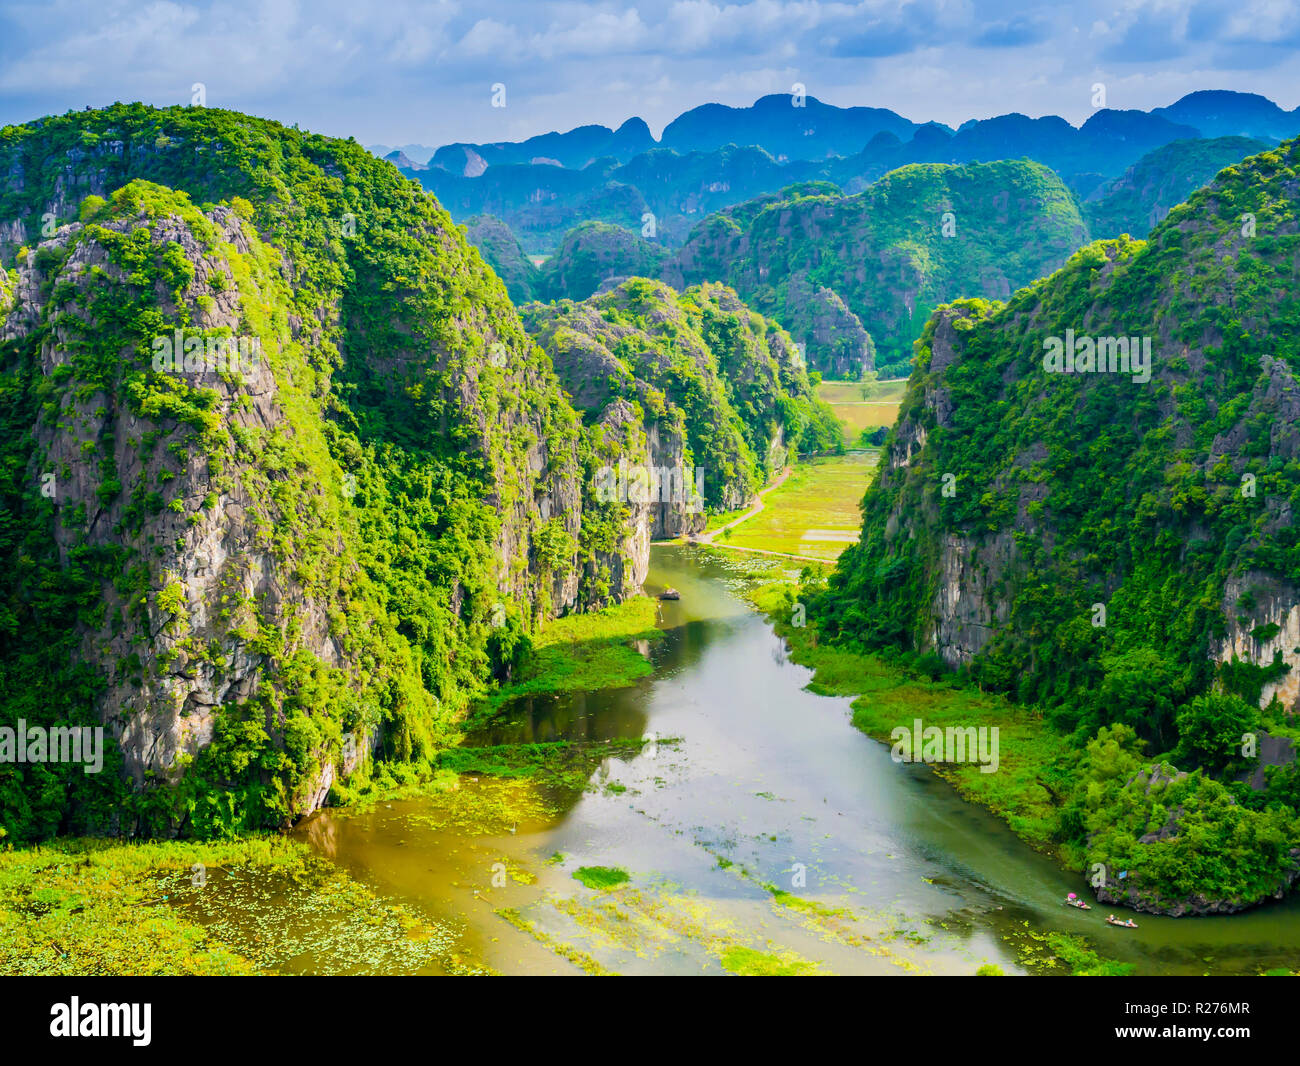 Amazing view of Tam Coc with karst formations and rice paddy fields, Ninh Binh province, Vietnam Stock Photo